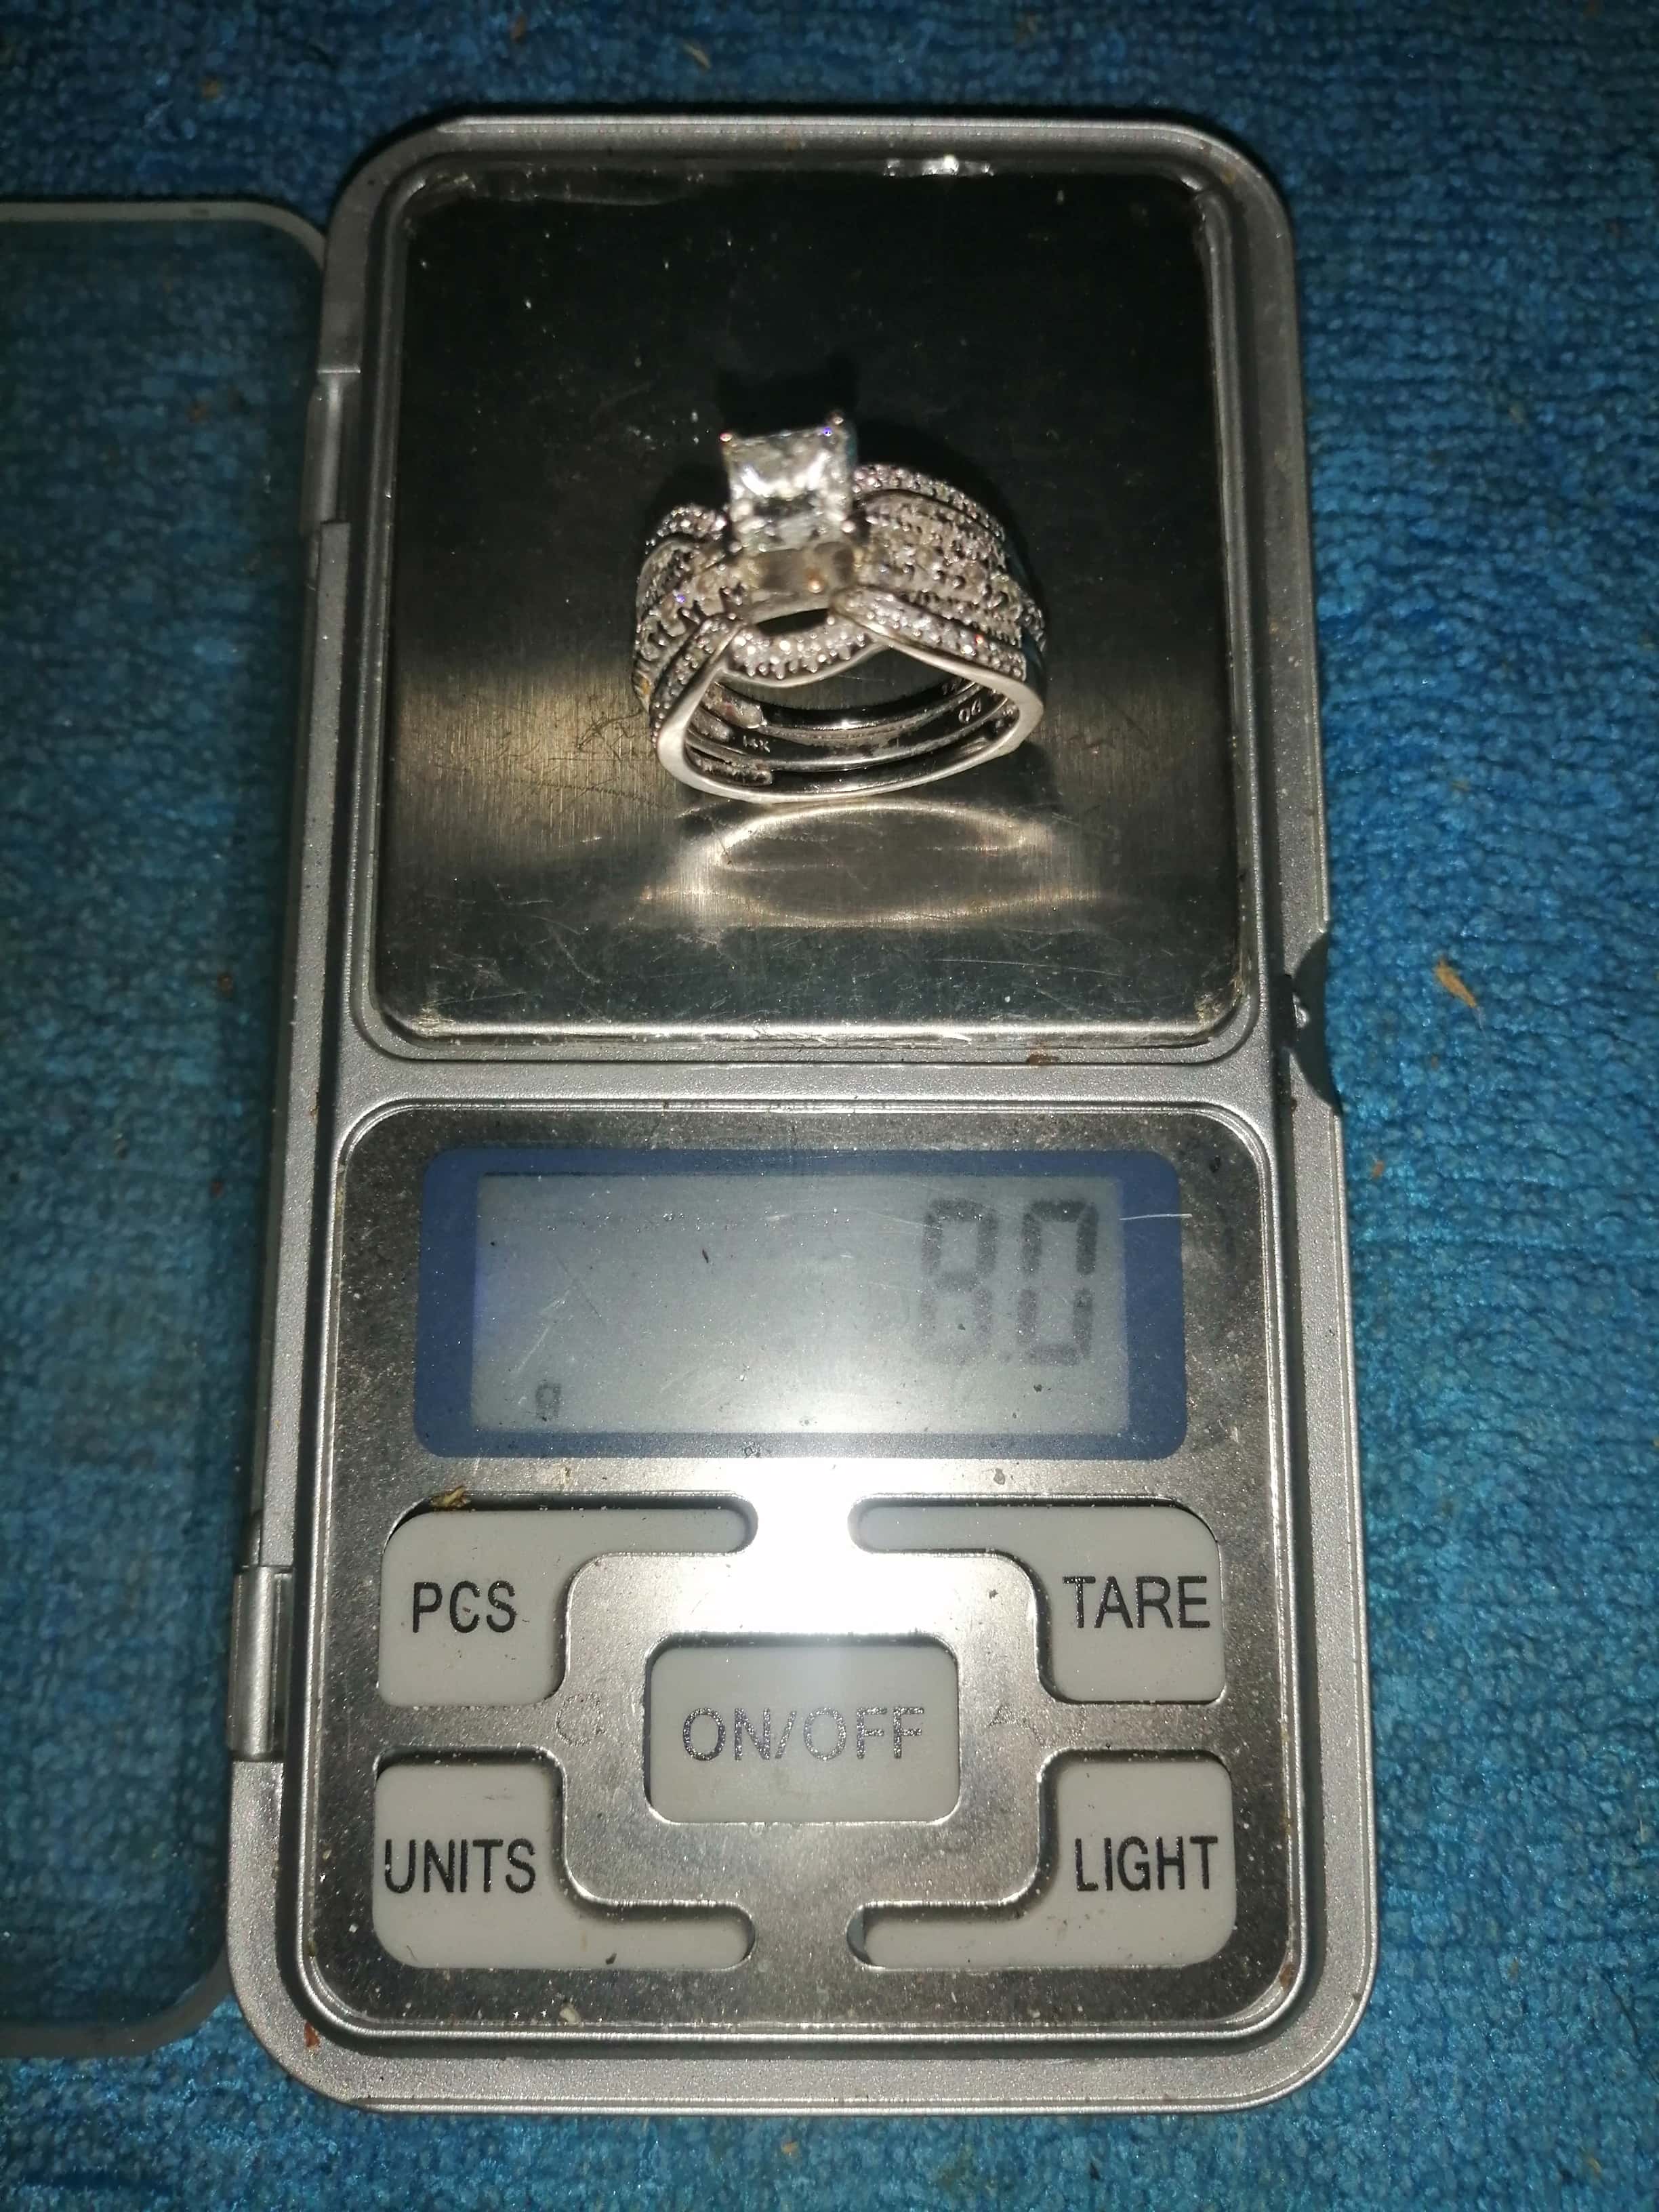 Platinum and Diamond Ring Resting on LCD Scale with 8.0g Shown on Sceen and Buttons Beneath on Blue Background